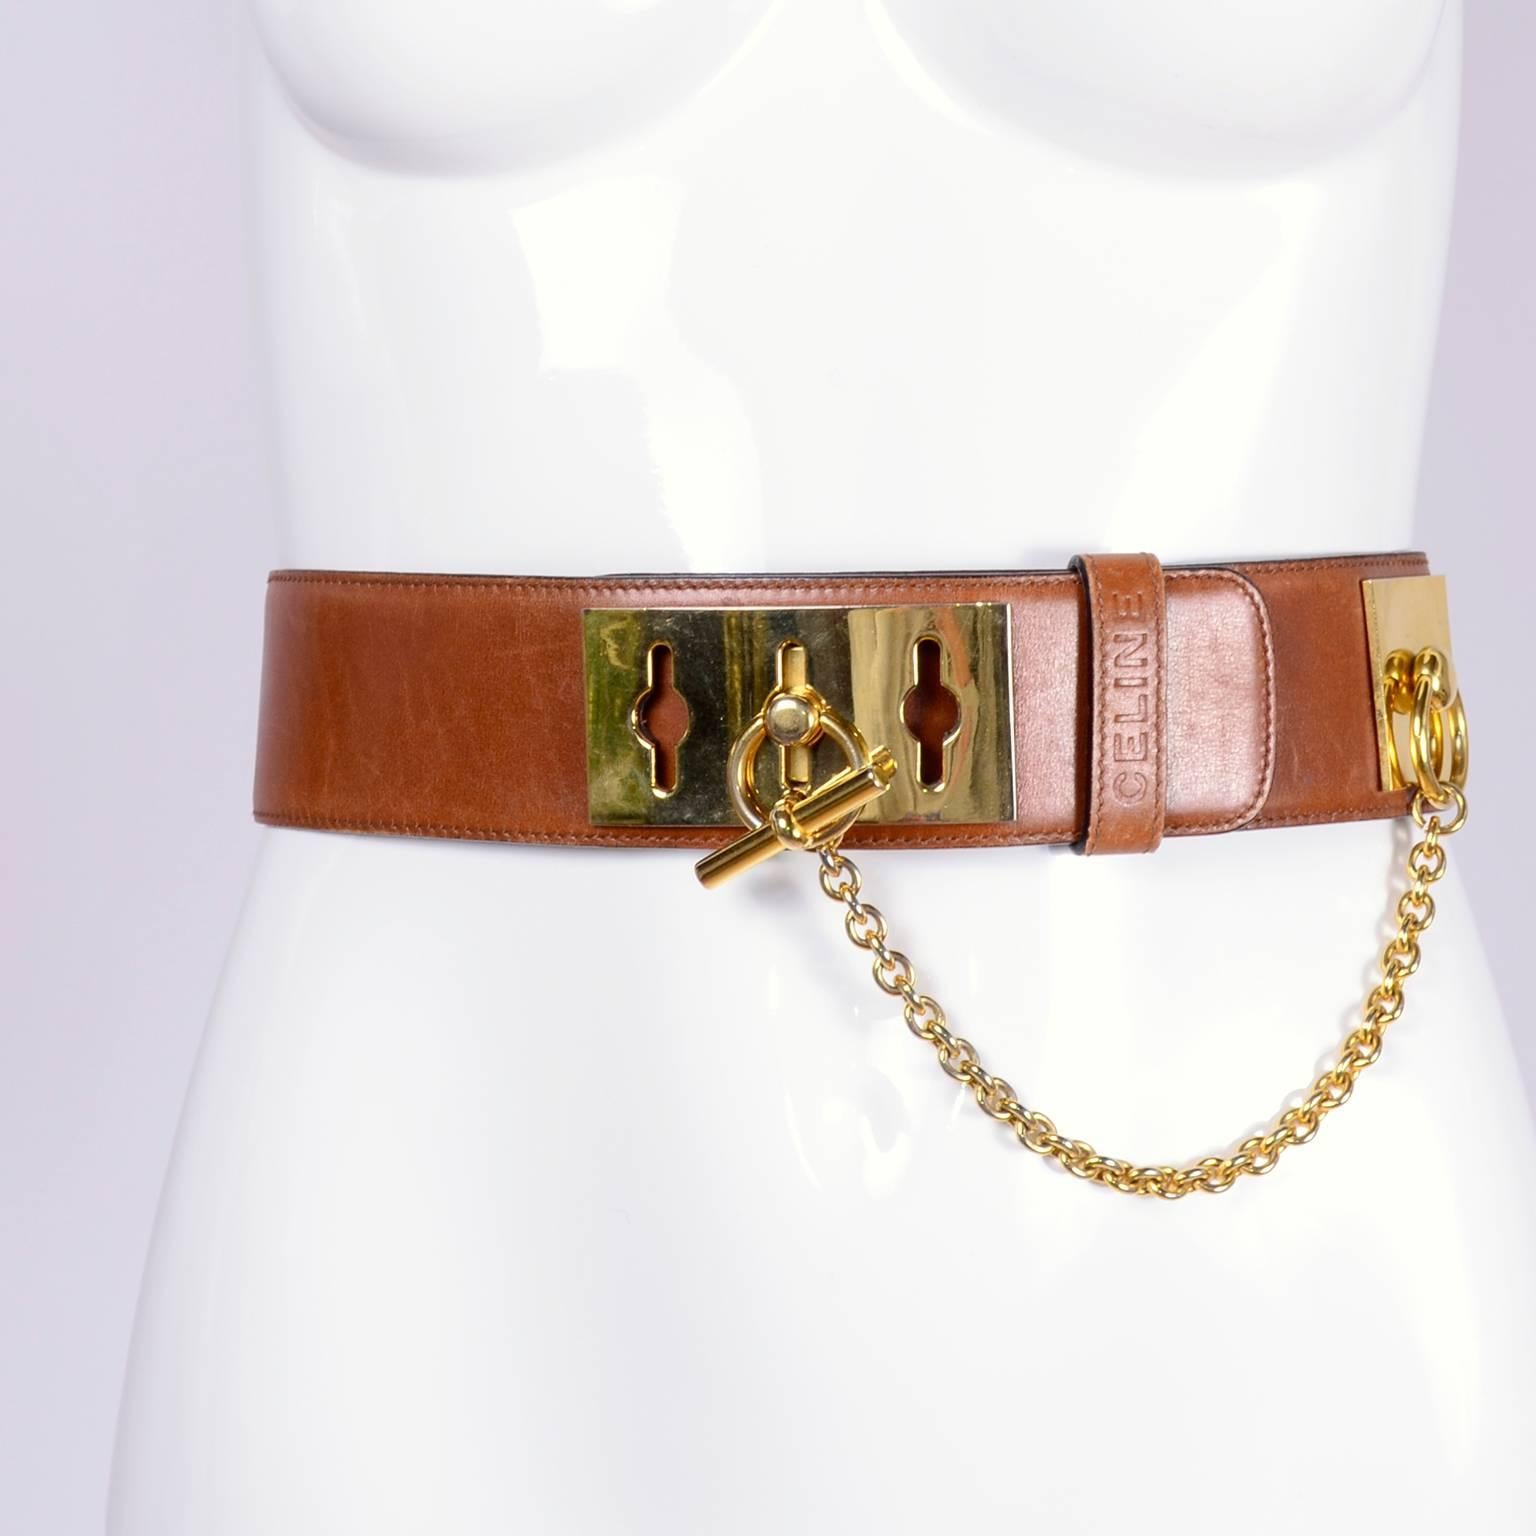 Celine Belt in Caramel Brown Leather With Gold Chain & Metal Peg Toggle Closure 1